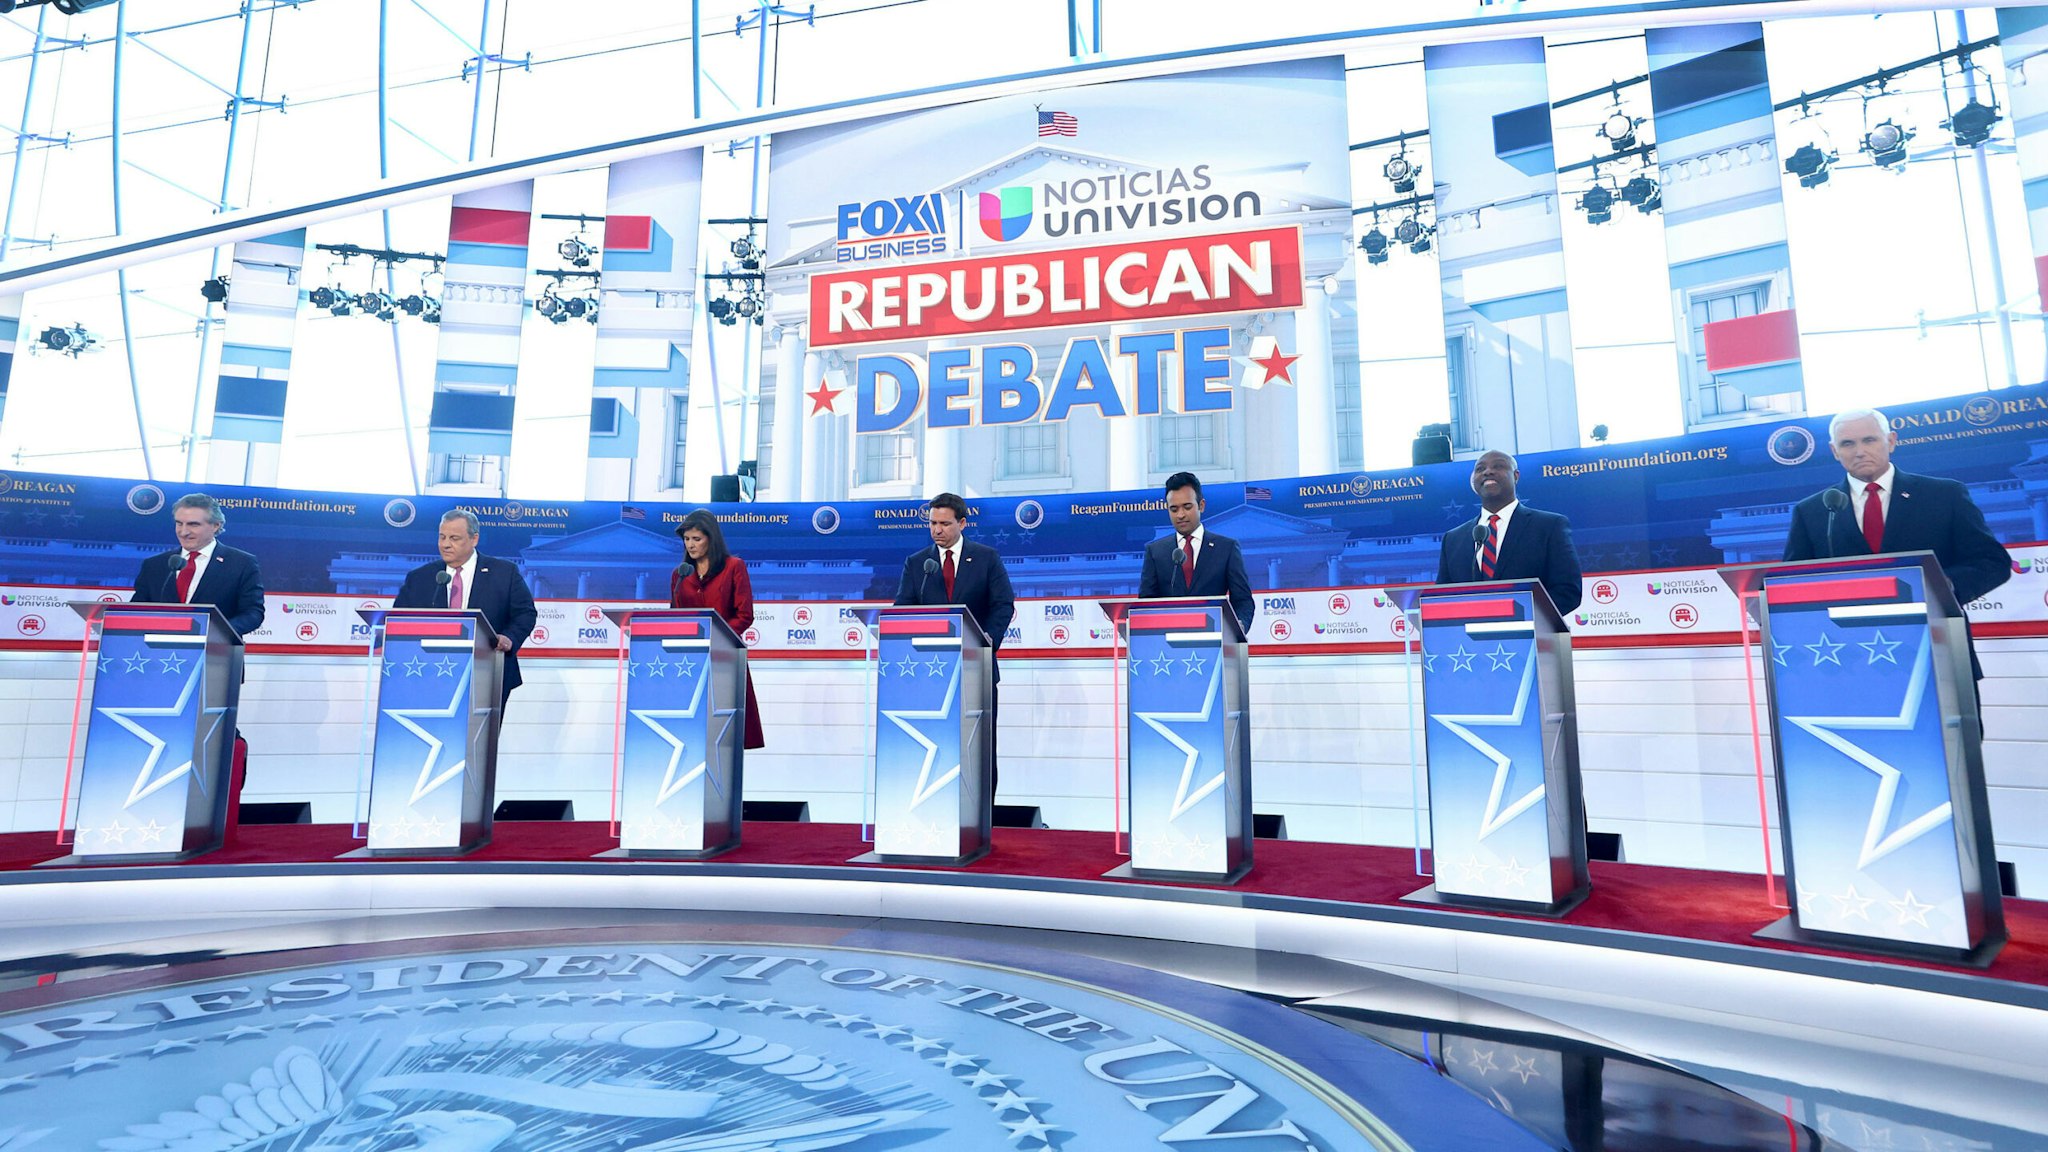 SIMI VALLEY, CALIFORNIA - SEPTEMBER 27: Republican presidential candidates (L-R), North Dakota Gov. Doug Burgum, former New Jersey Gov. Chris Christie, former U.N. Ambassador Nikki Haley, Florida Gov. Ron DeSantis, Vivek Ramaswamy, U.S. Sen. Tim Scott (R-SC) and former U.S. Vice President Mike Pence are introduced during the FOX Business Republican Primary Debate at the Ronald Reagan Presidential Library on September 27, 2023 in Simi Valley, California. Seven presidential hopefuls squared off in the second Republican primary debate as former U.S. President Donald Trump, currently facing indictments in four locations, declined again to participate.